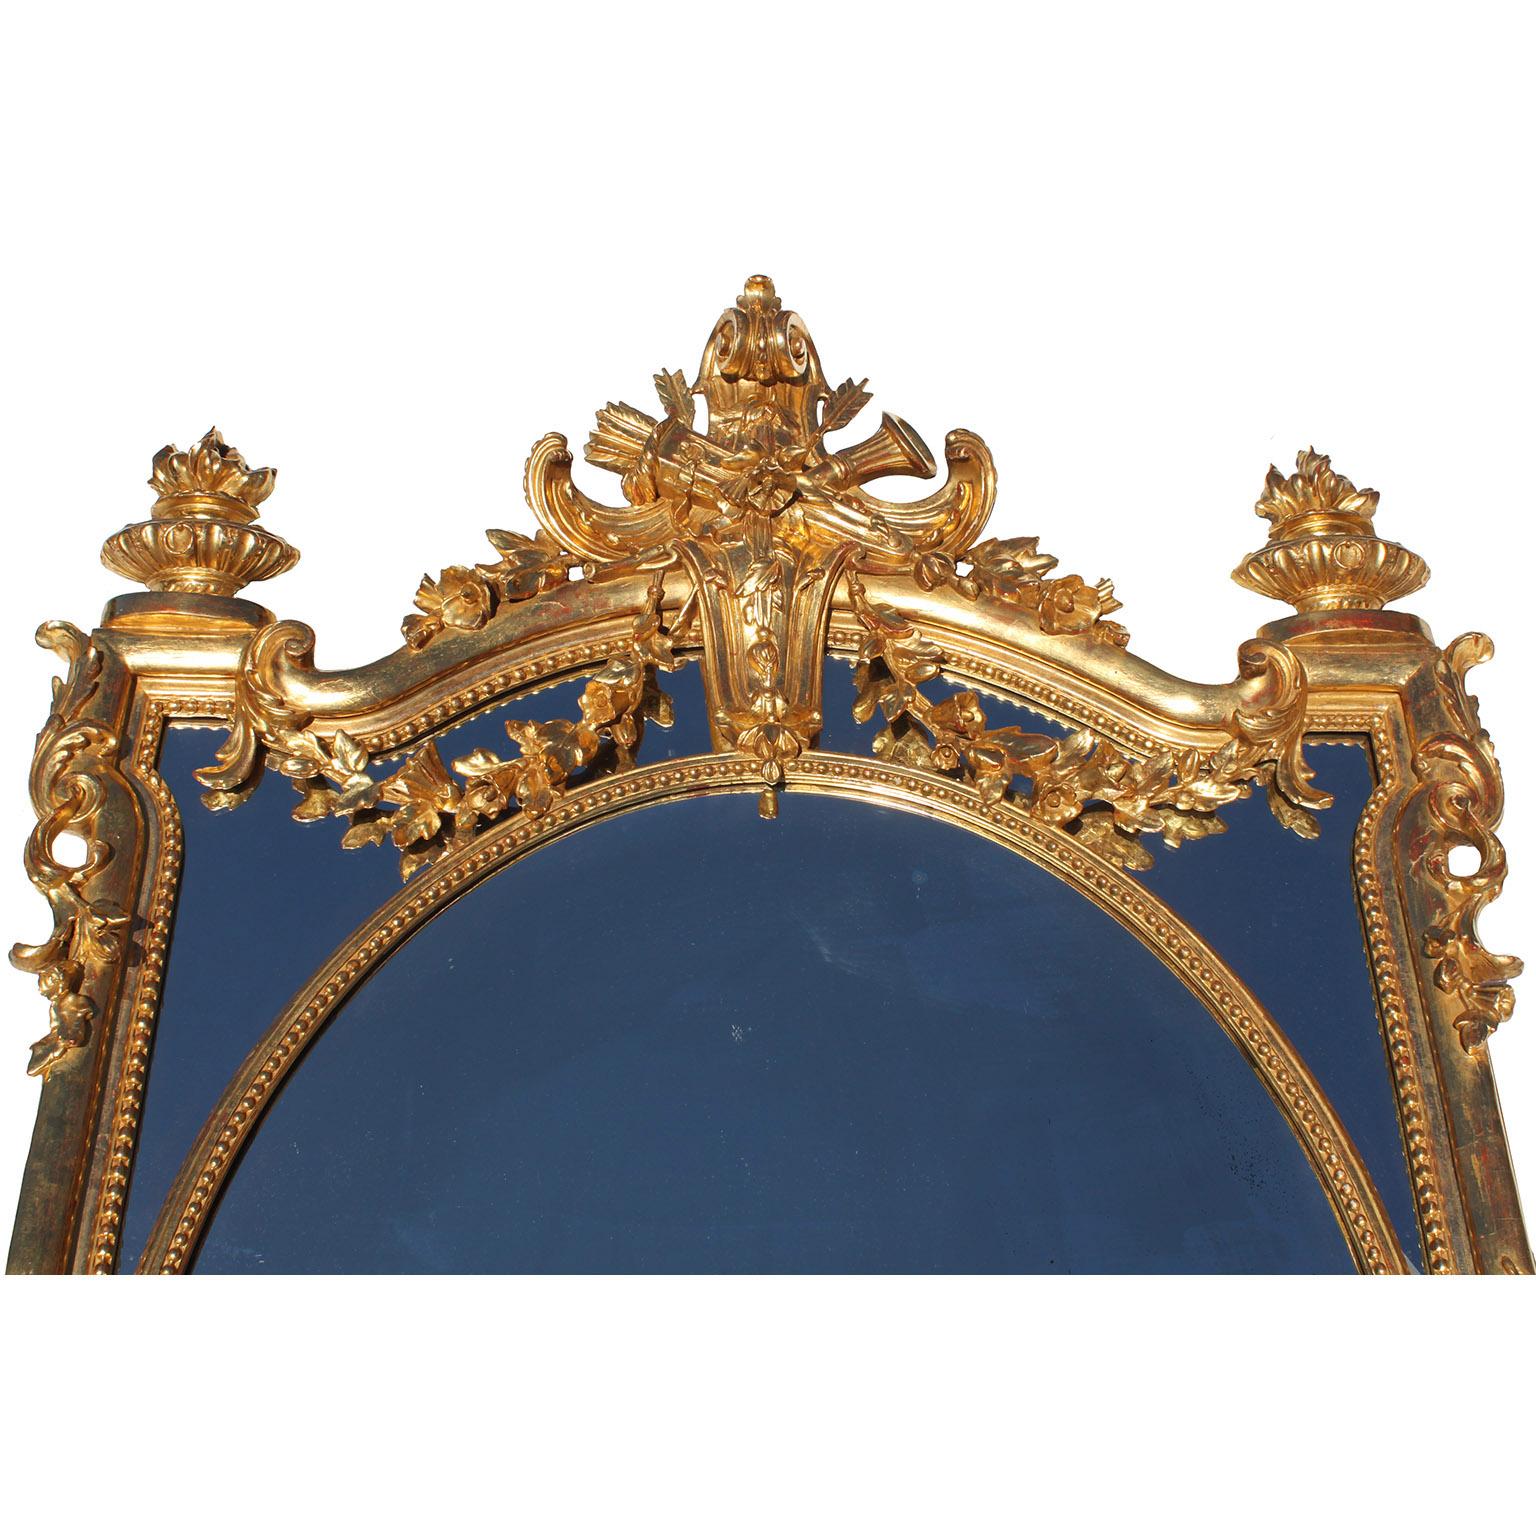 A Very Fine French 19th Century Louis XV Style Gilt-Wood and Gilt-Gesso Carved Ornamental Mantel Mirror. The center oval mirror plate with mirrored corner panels, crowned with an allegorical scrolled carving of an arrow quiver, a flute, arrows,